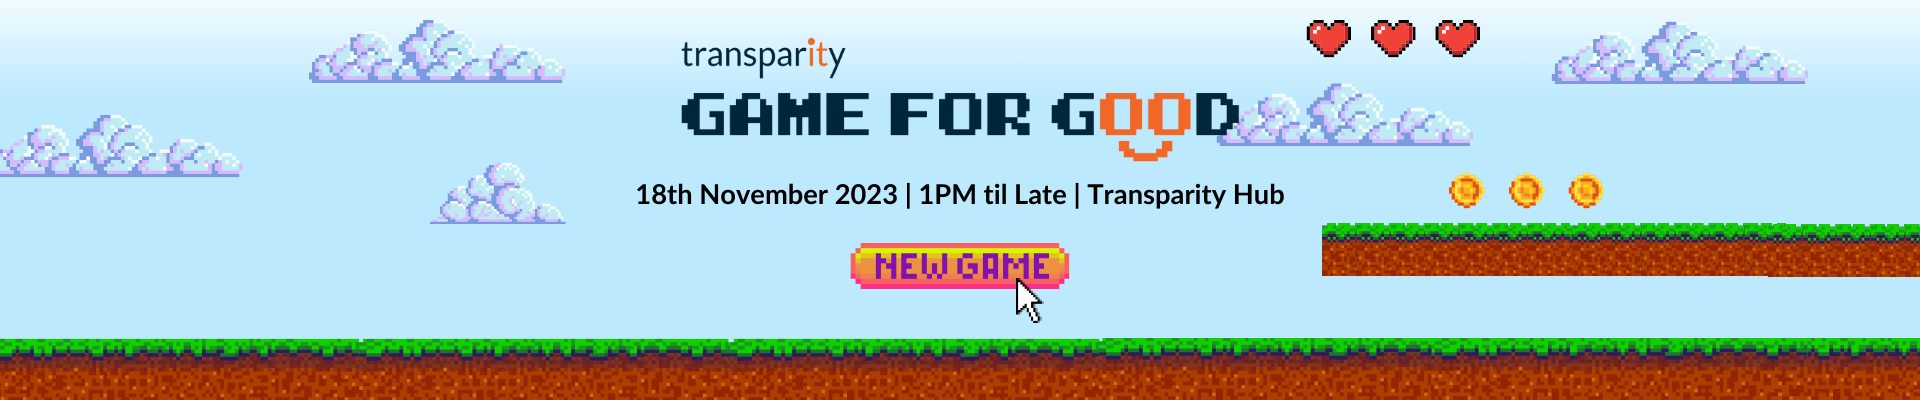 Game for Good Banner 7.2 × 3.6 in 1584 × 396 px 1920 x 400